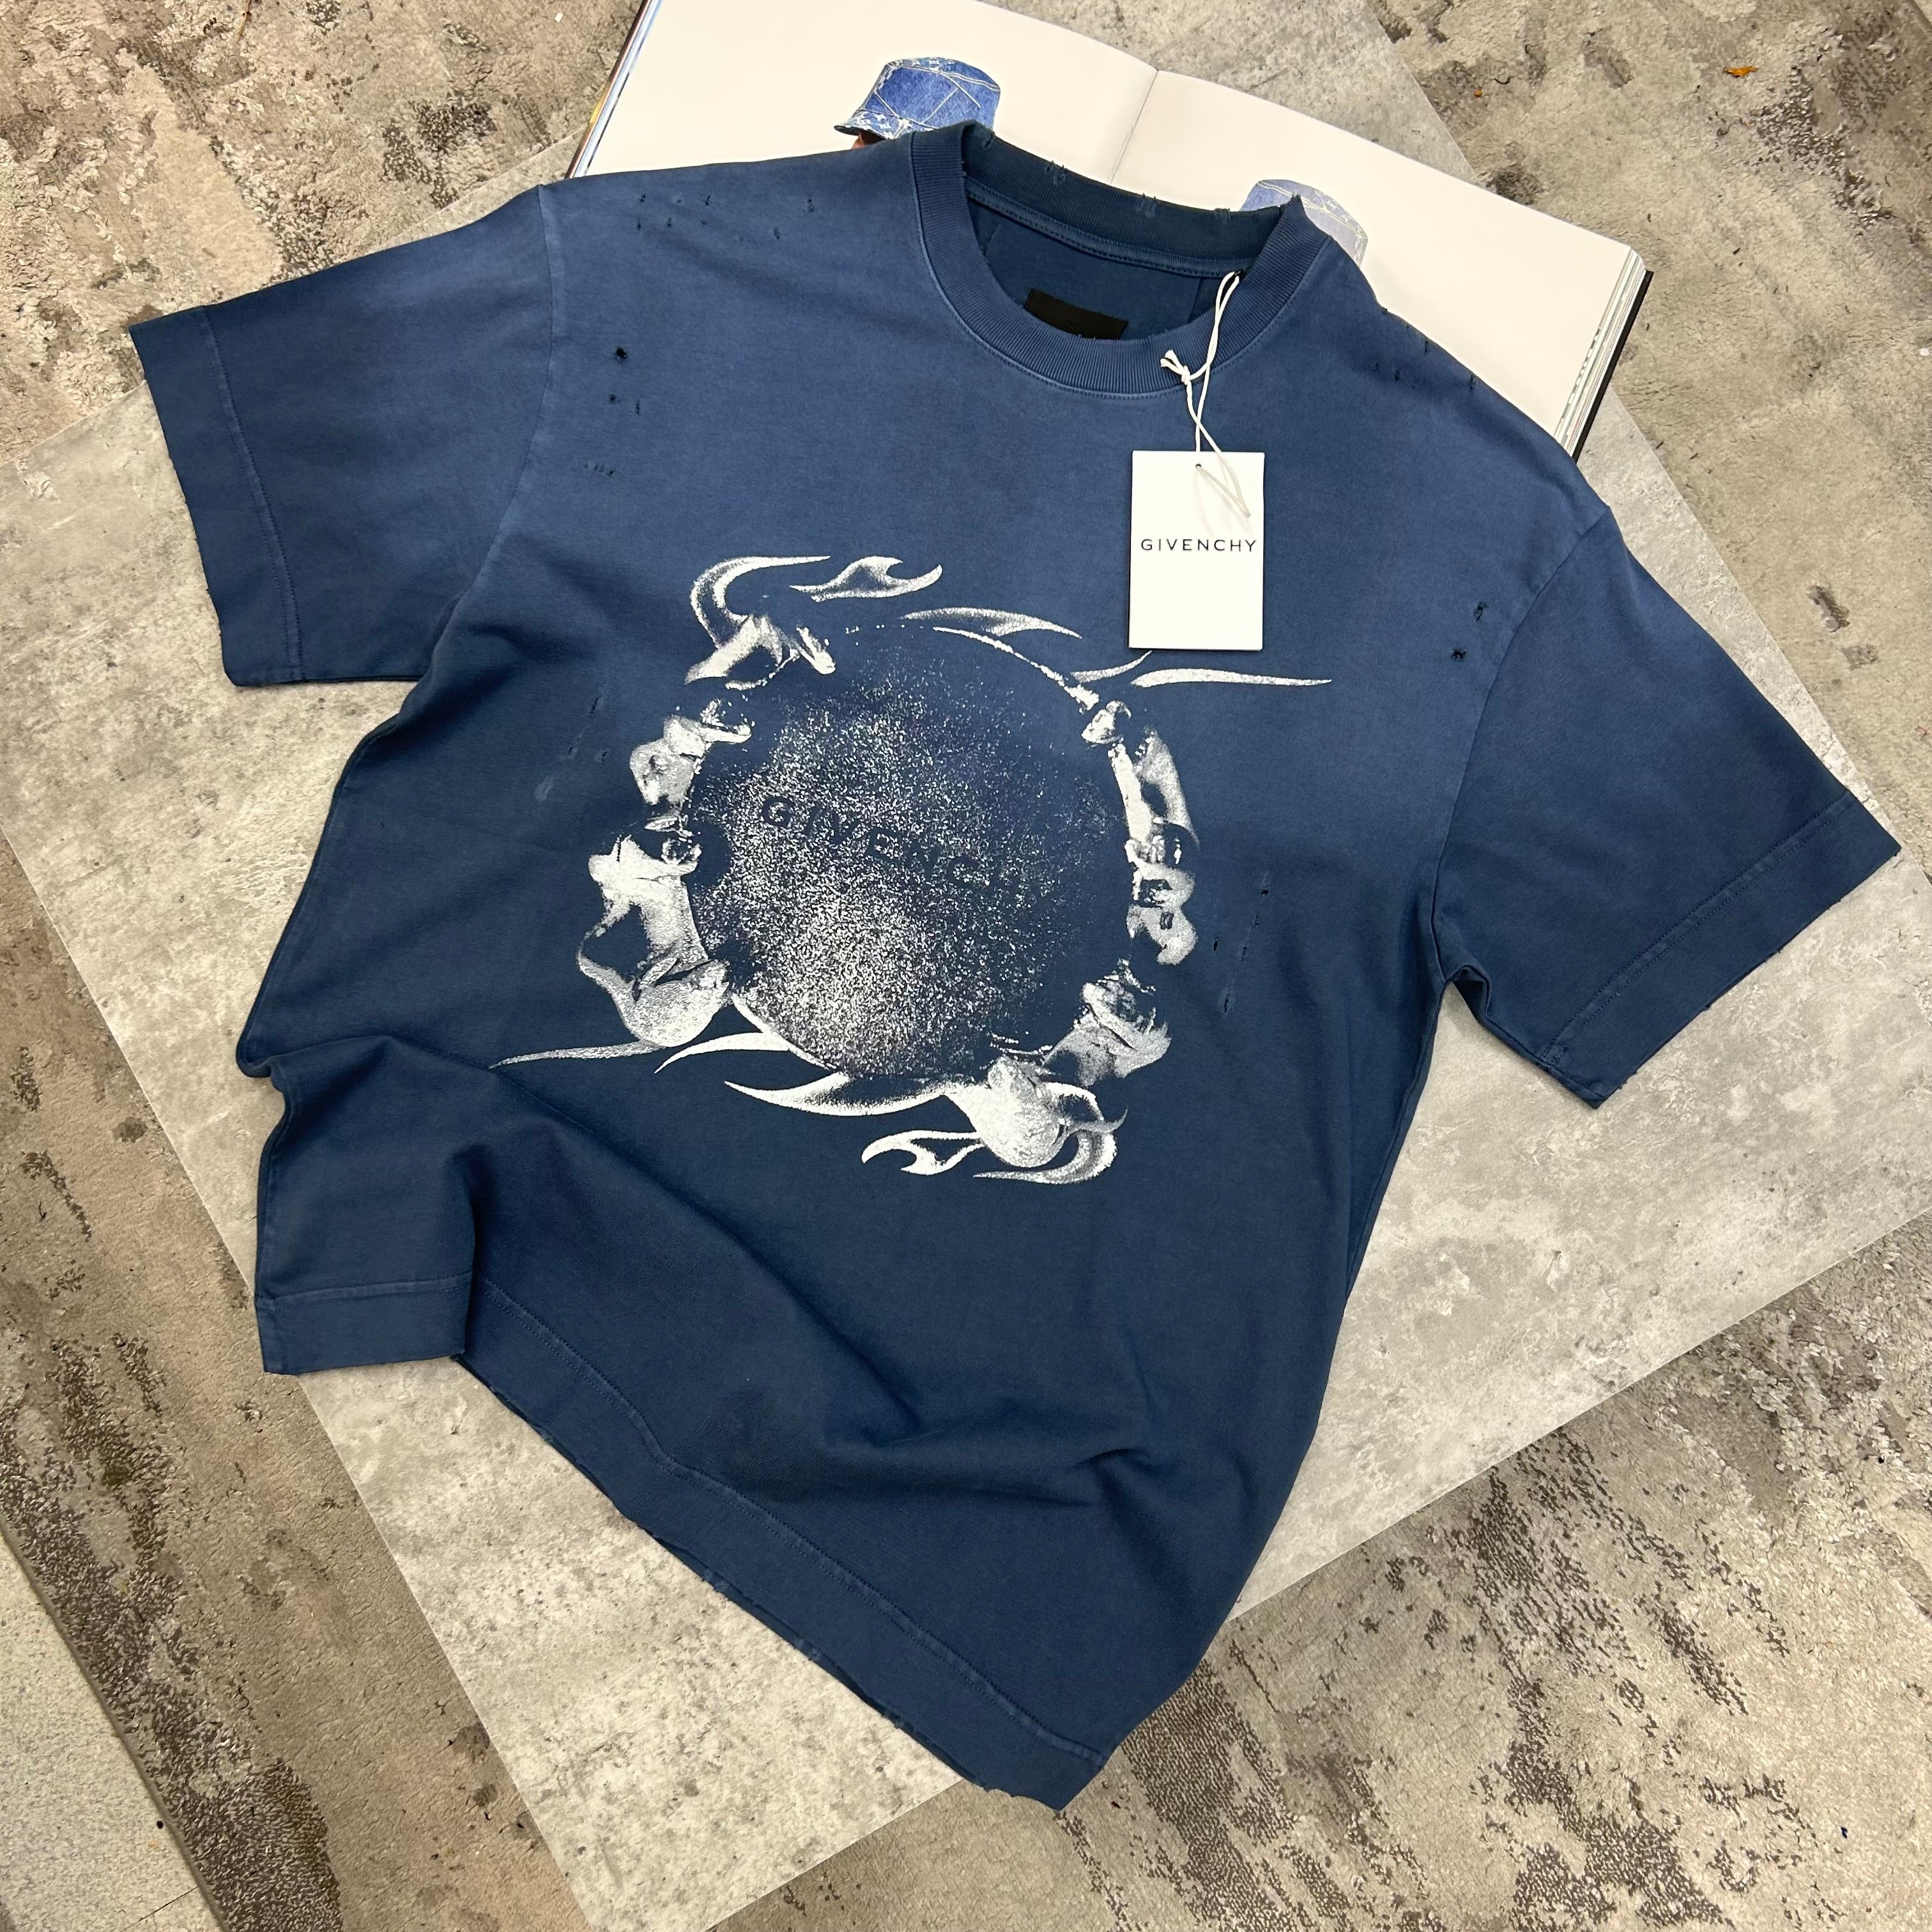 GIVENCHY - DEVOURE T-SHIRT - NAVY